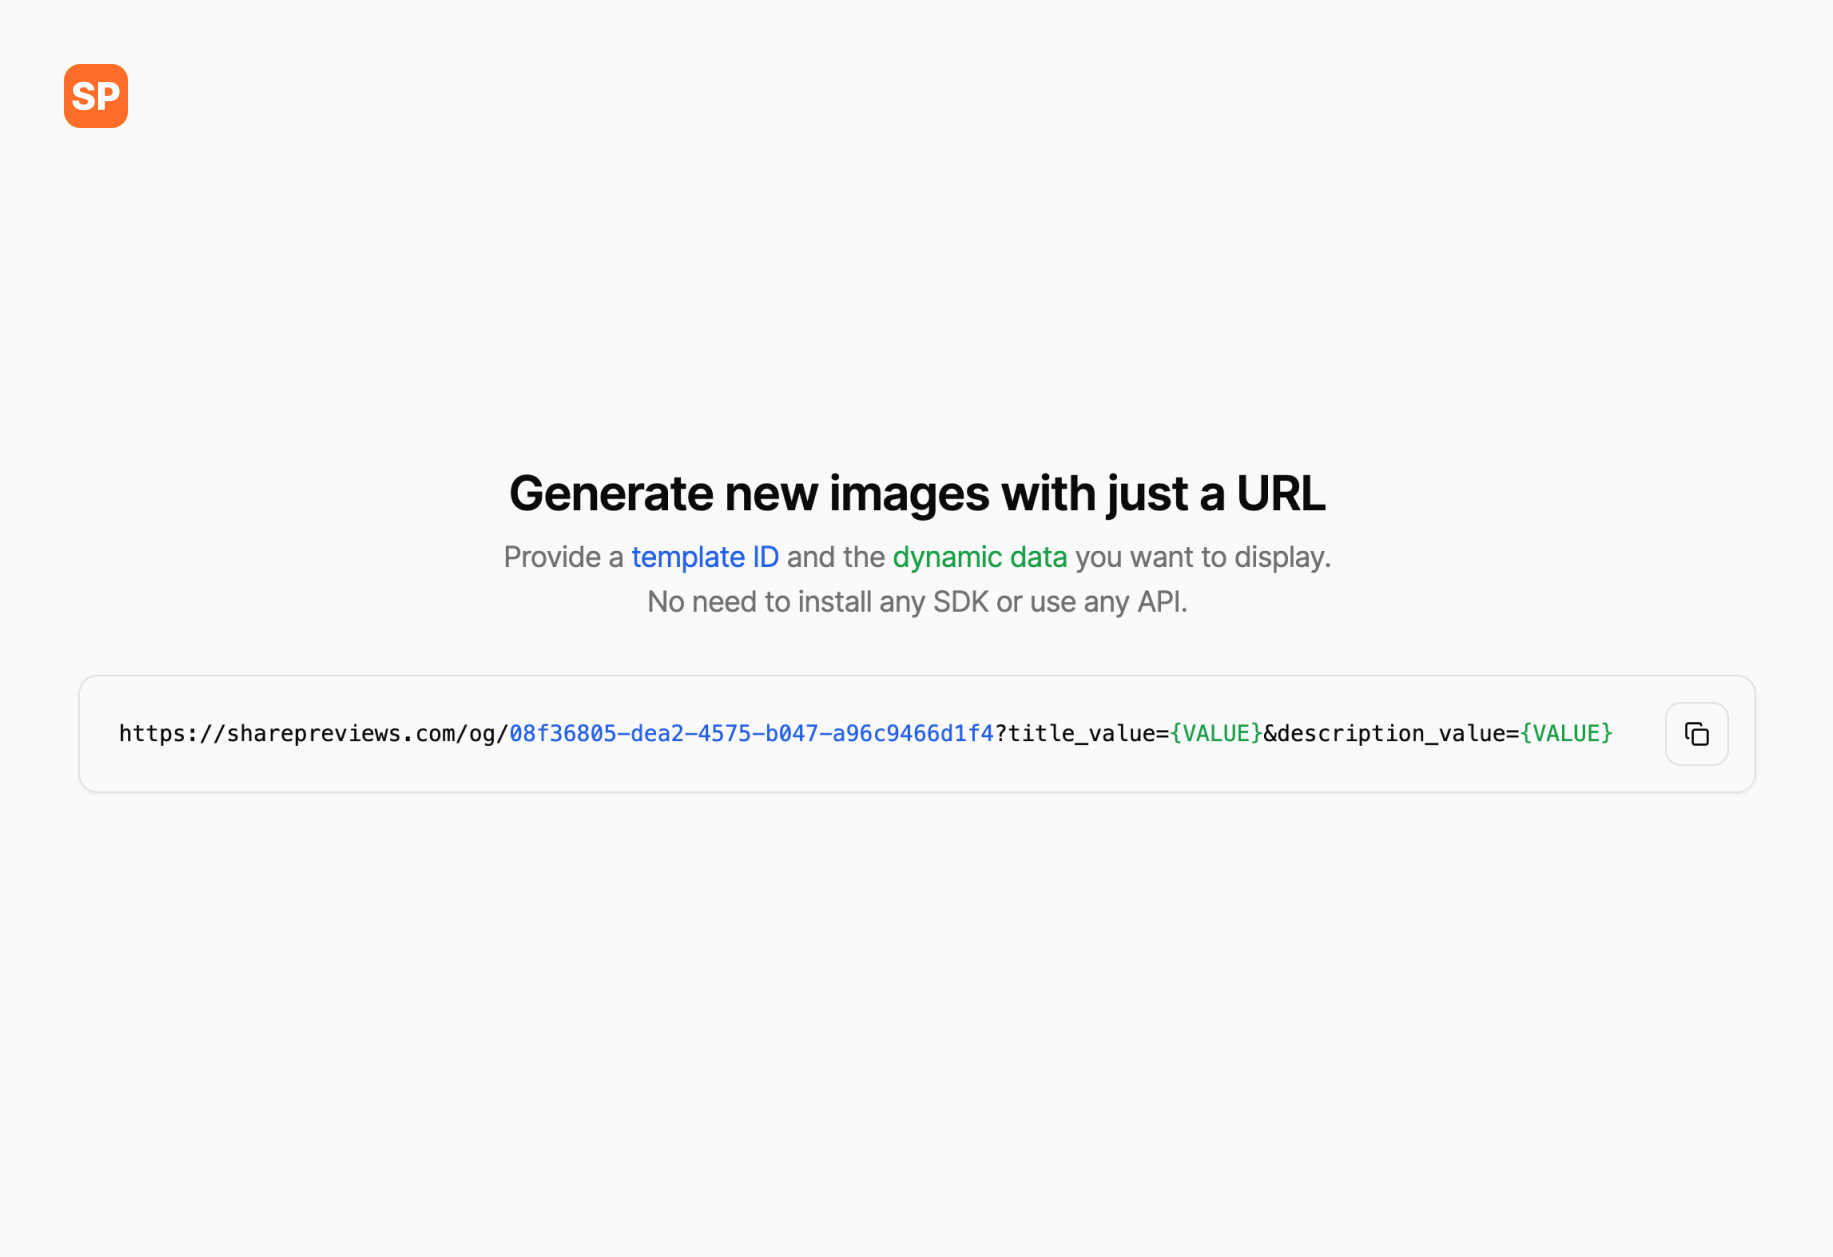 sharepreviews Generate new images with just a URL